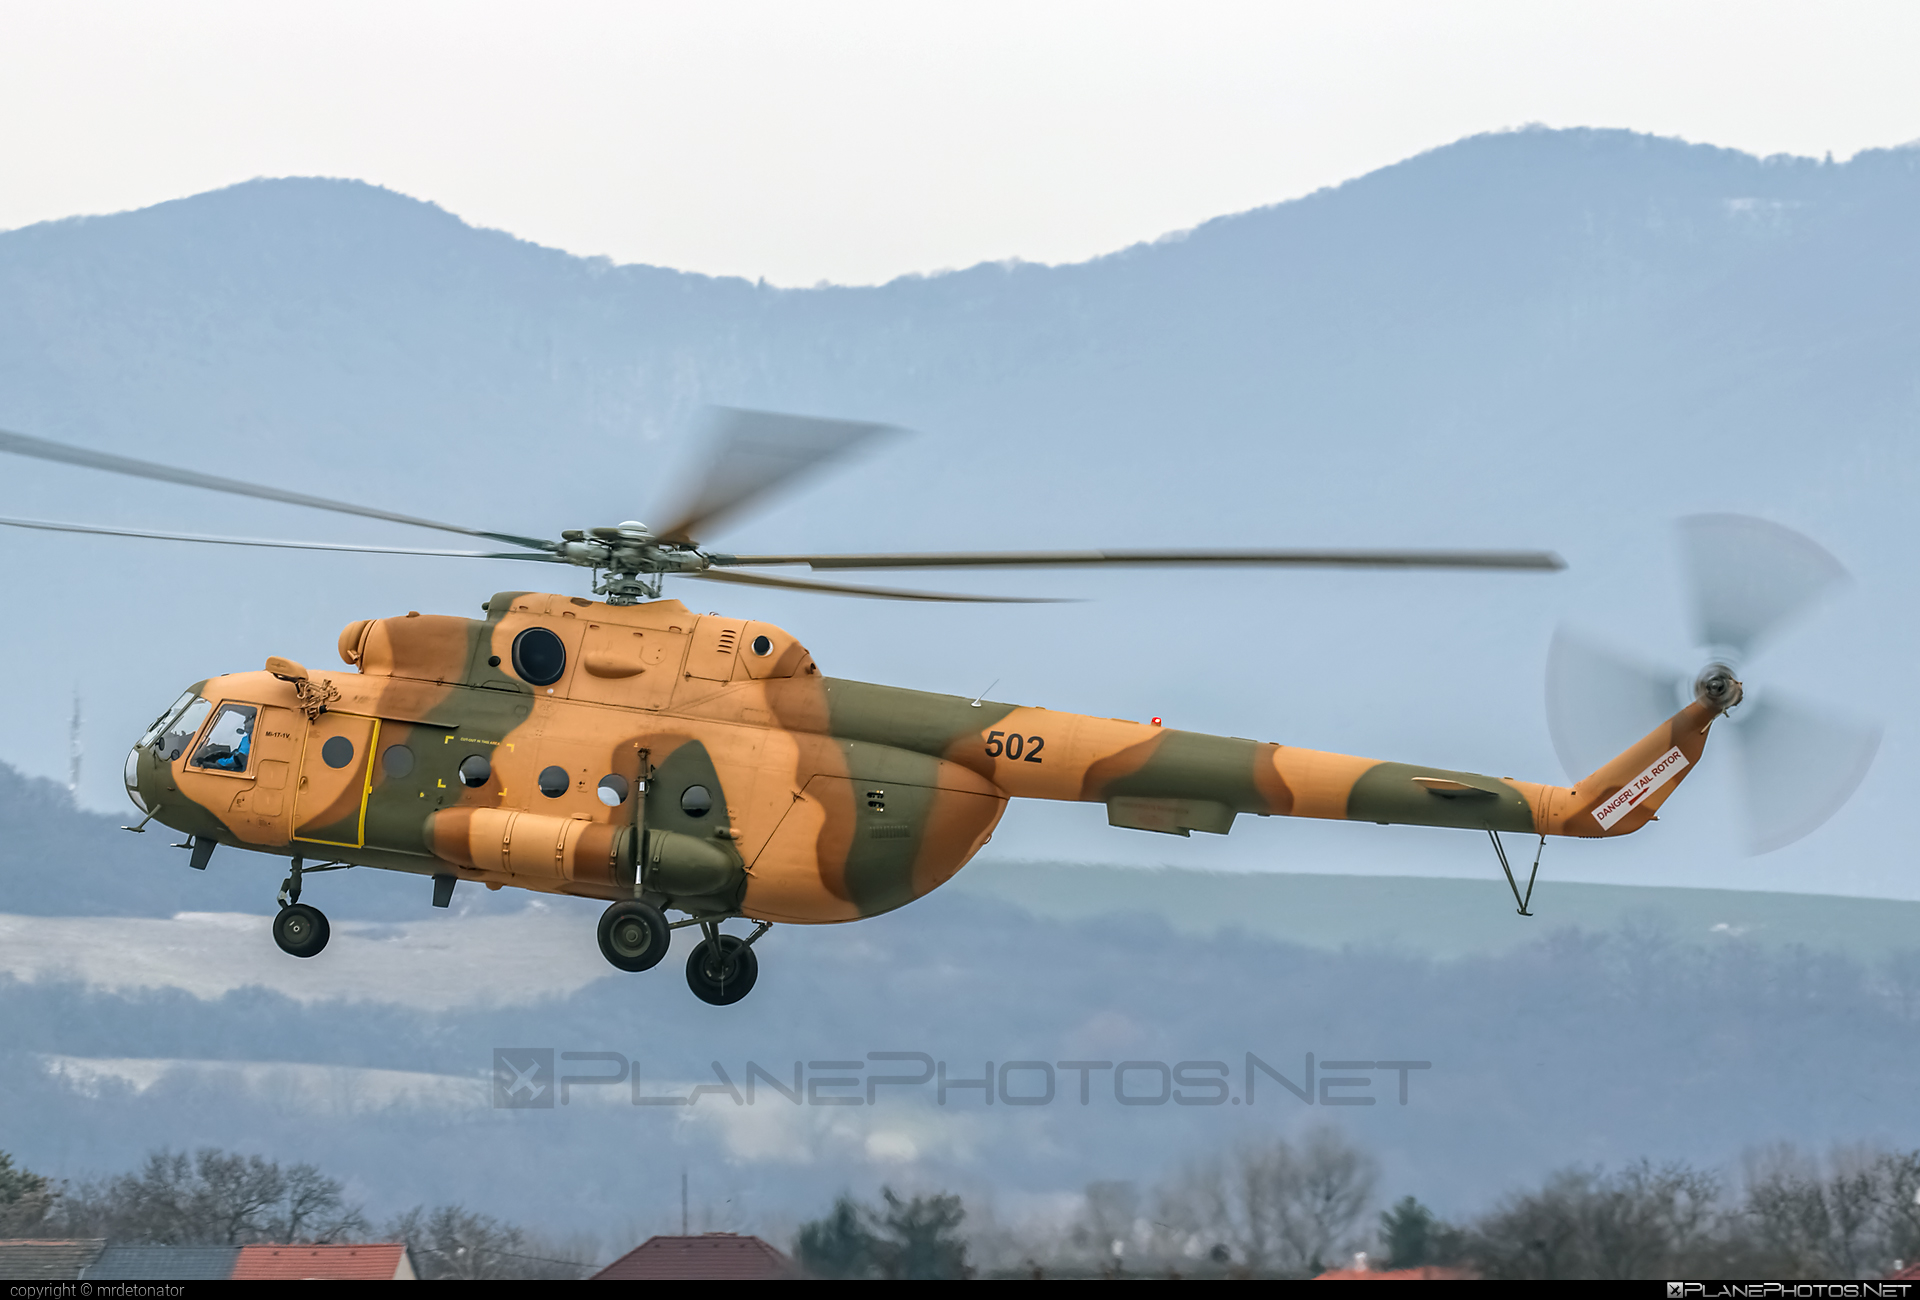 Mil Mi-17-1V - 502 operated by Afghan Air Force #afghanairforce #mi17 #mi171v #mil #milMi17 #milMi171v #milhelicopters